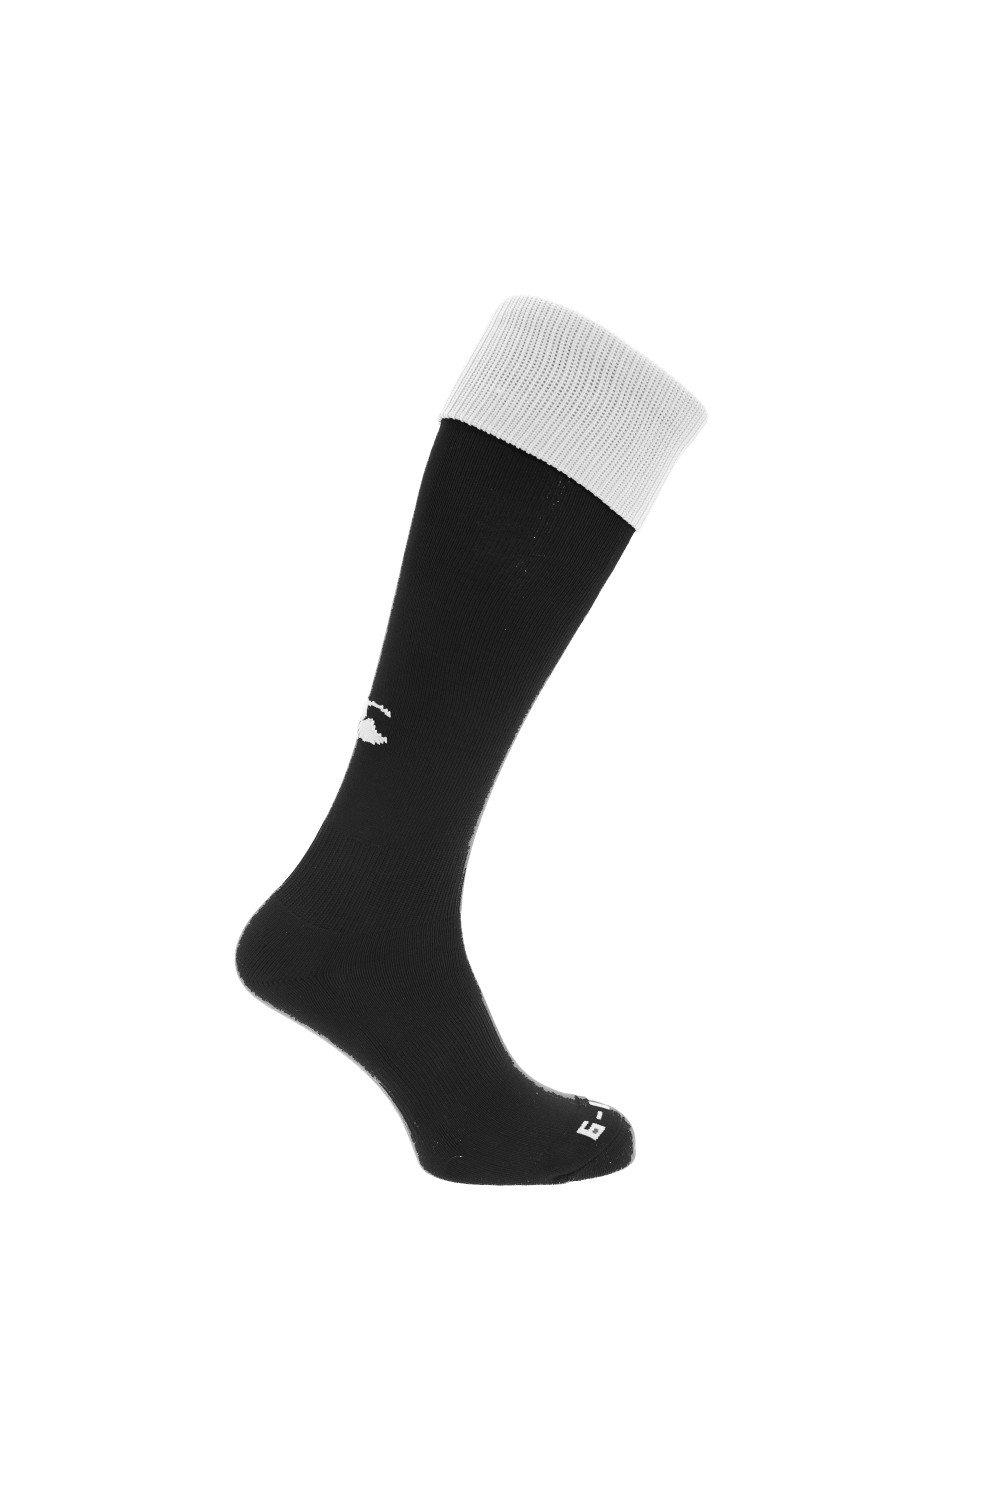 Playing Cap Rugby Sport Socks